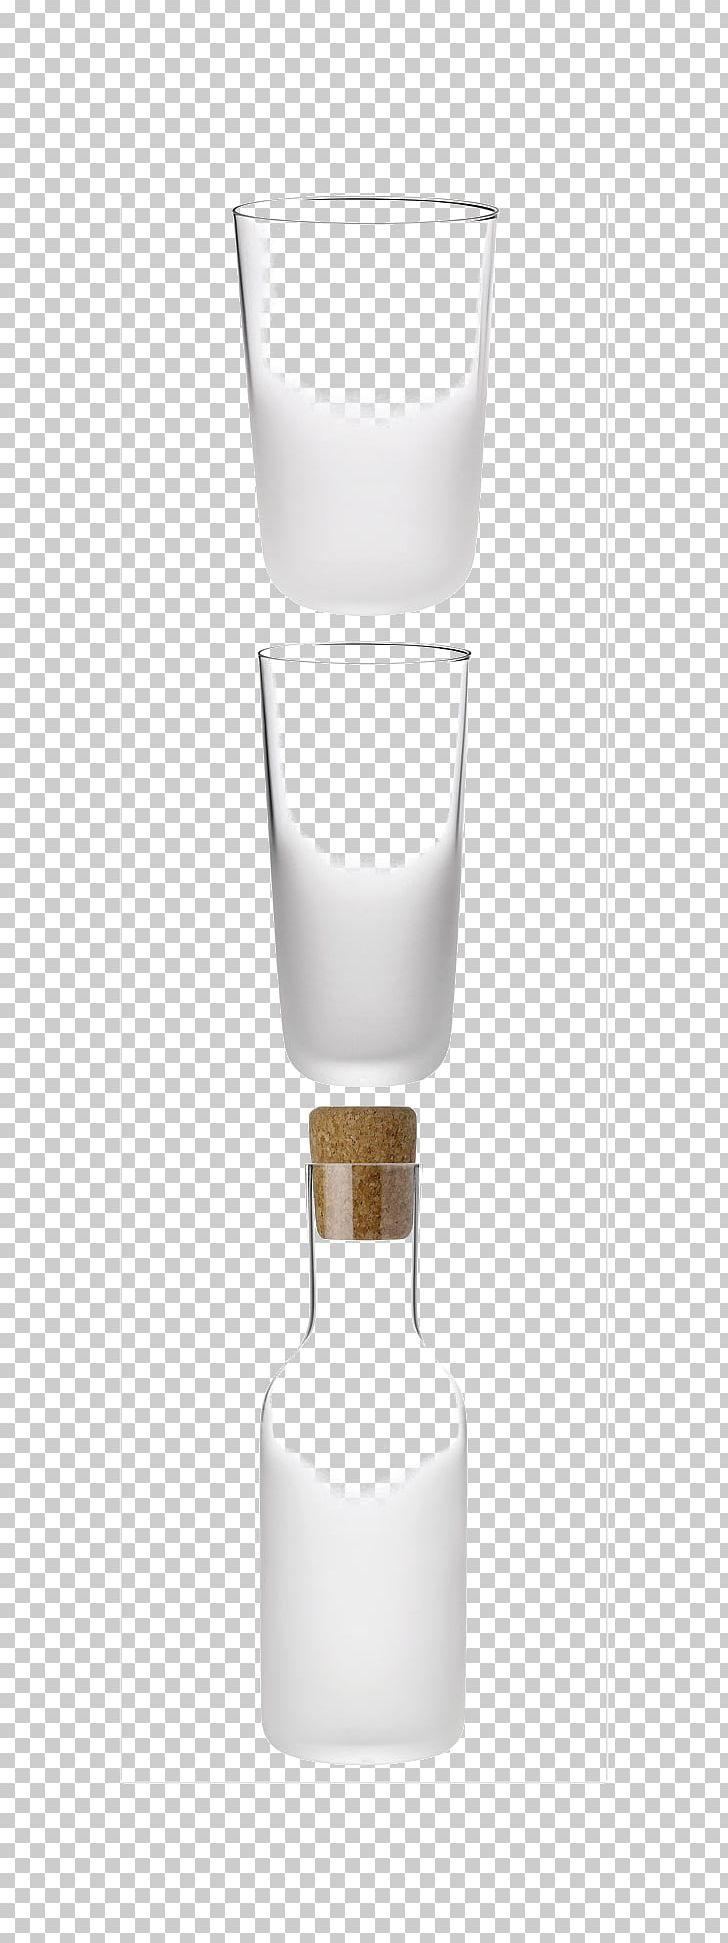 SuperCupNI Milk Glass PNG, Clipart, Coffee Cup, Cup, Cup Cake, Download, Drinkware Free PNG Download